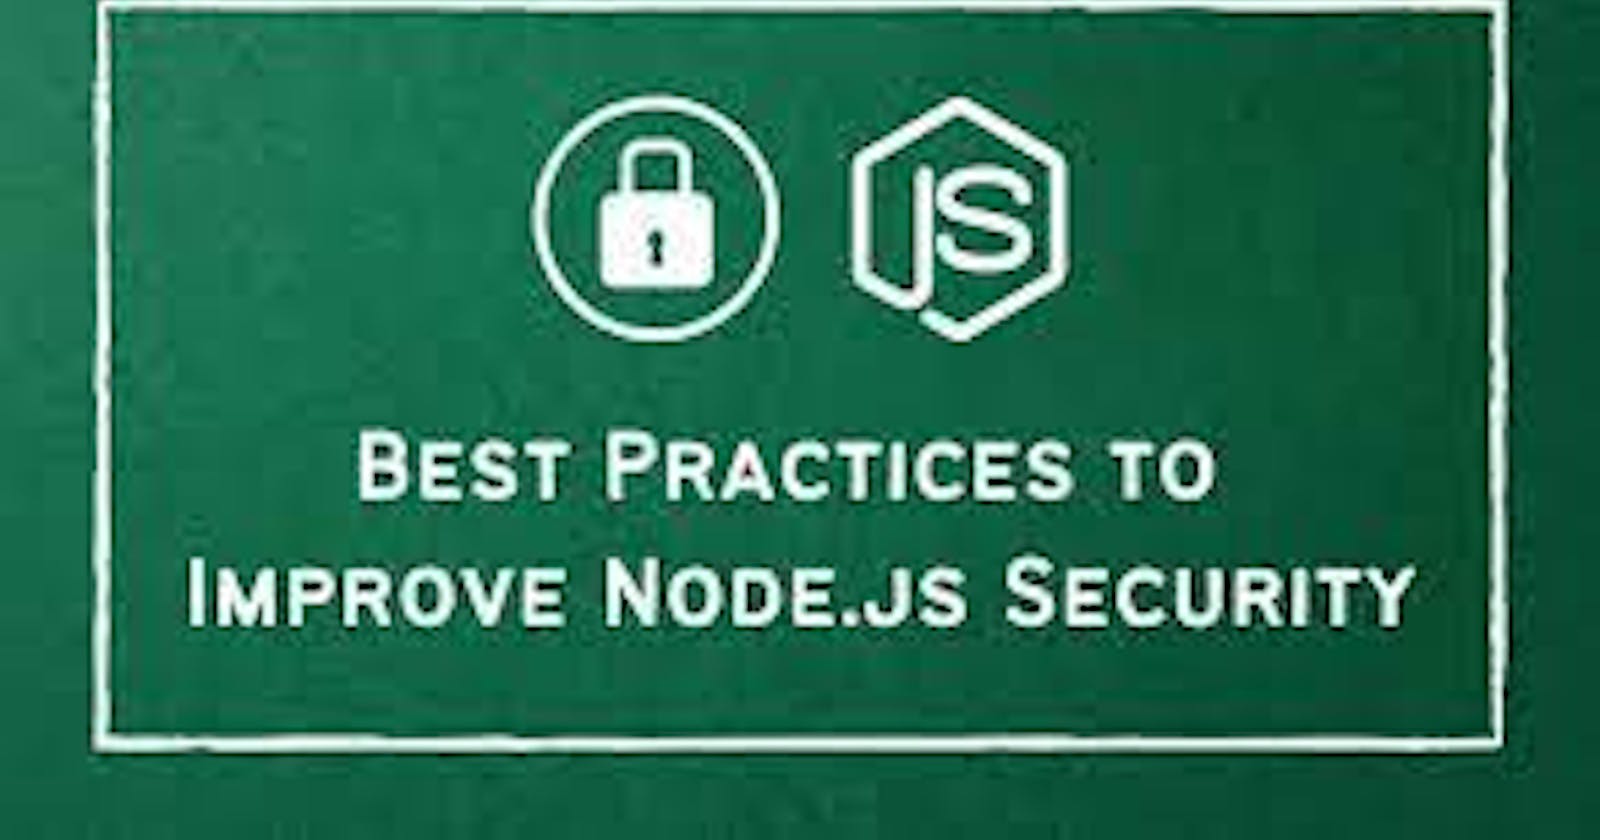 Implementing security best practices in Node.js, such as password hashing, JWT, and OAuth